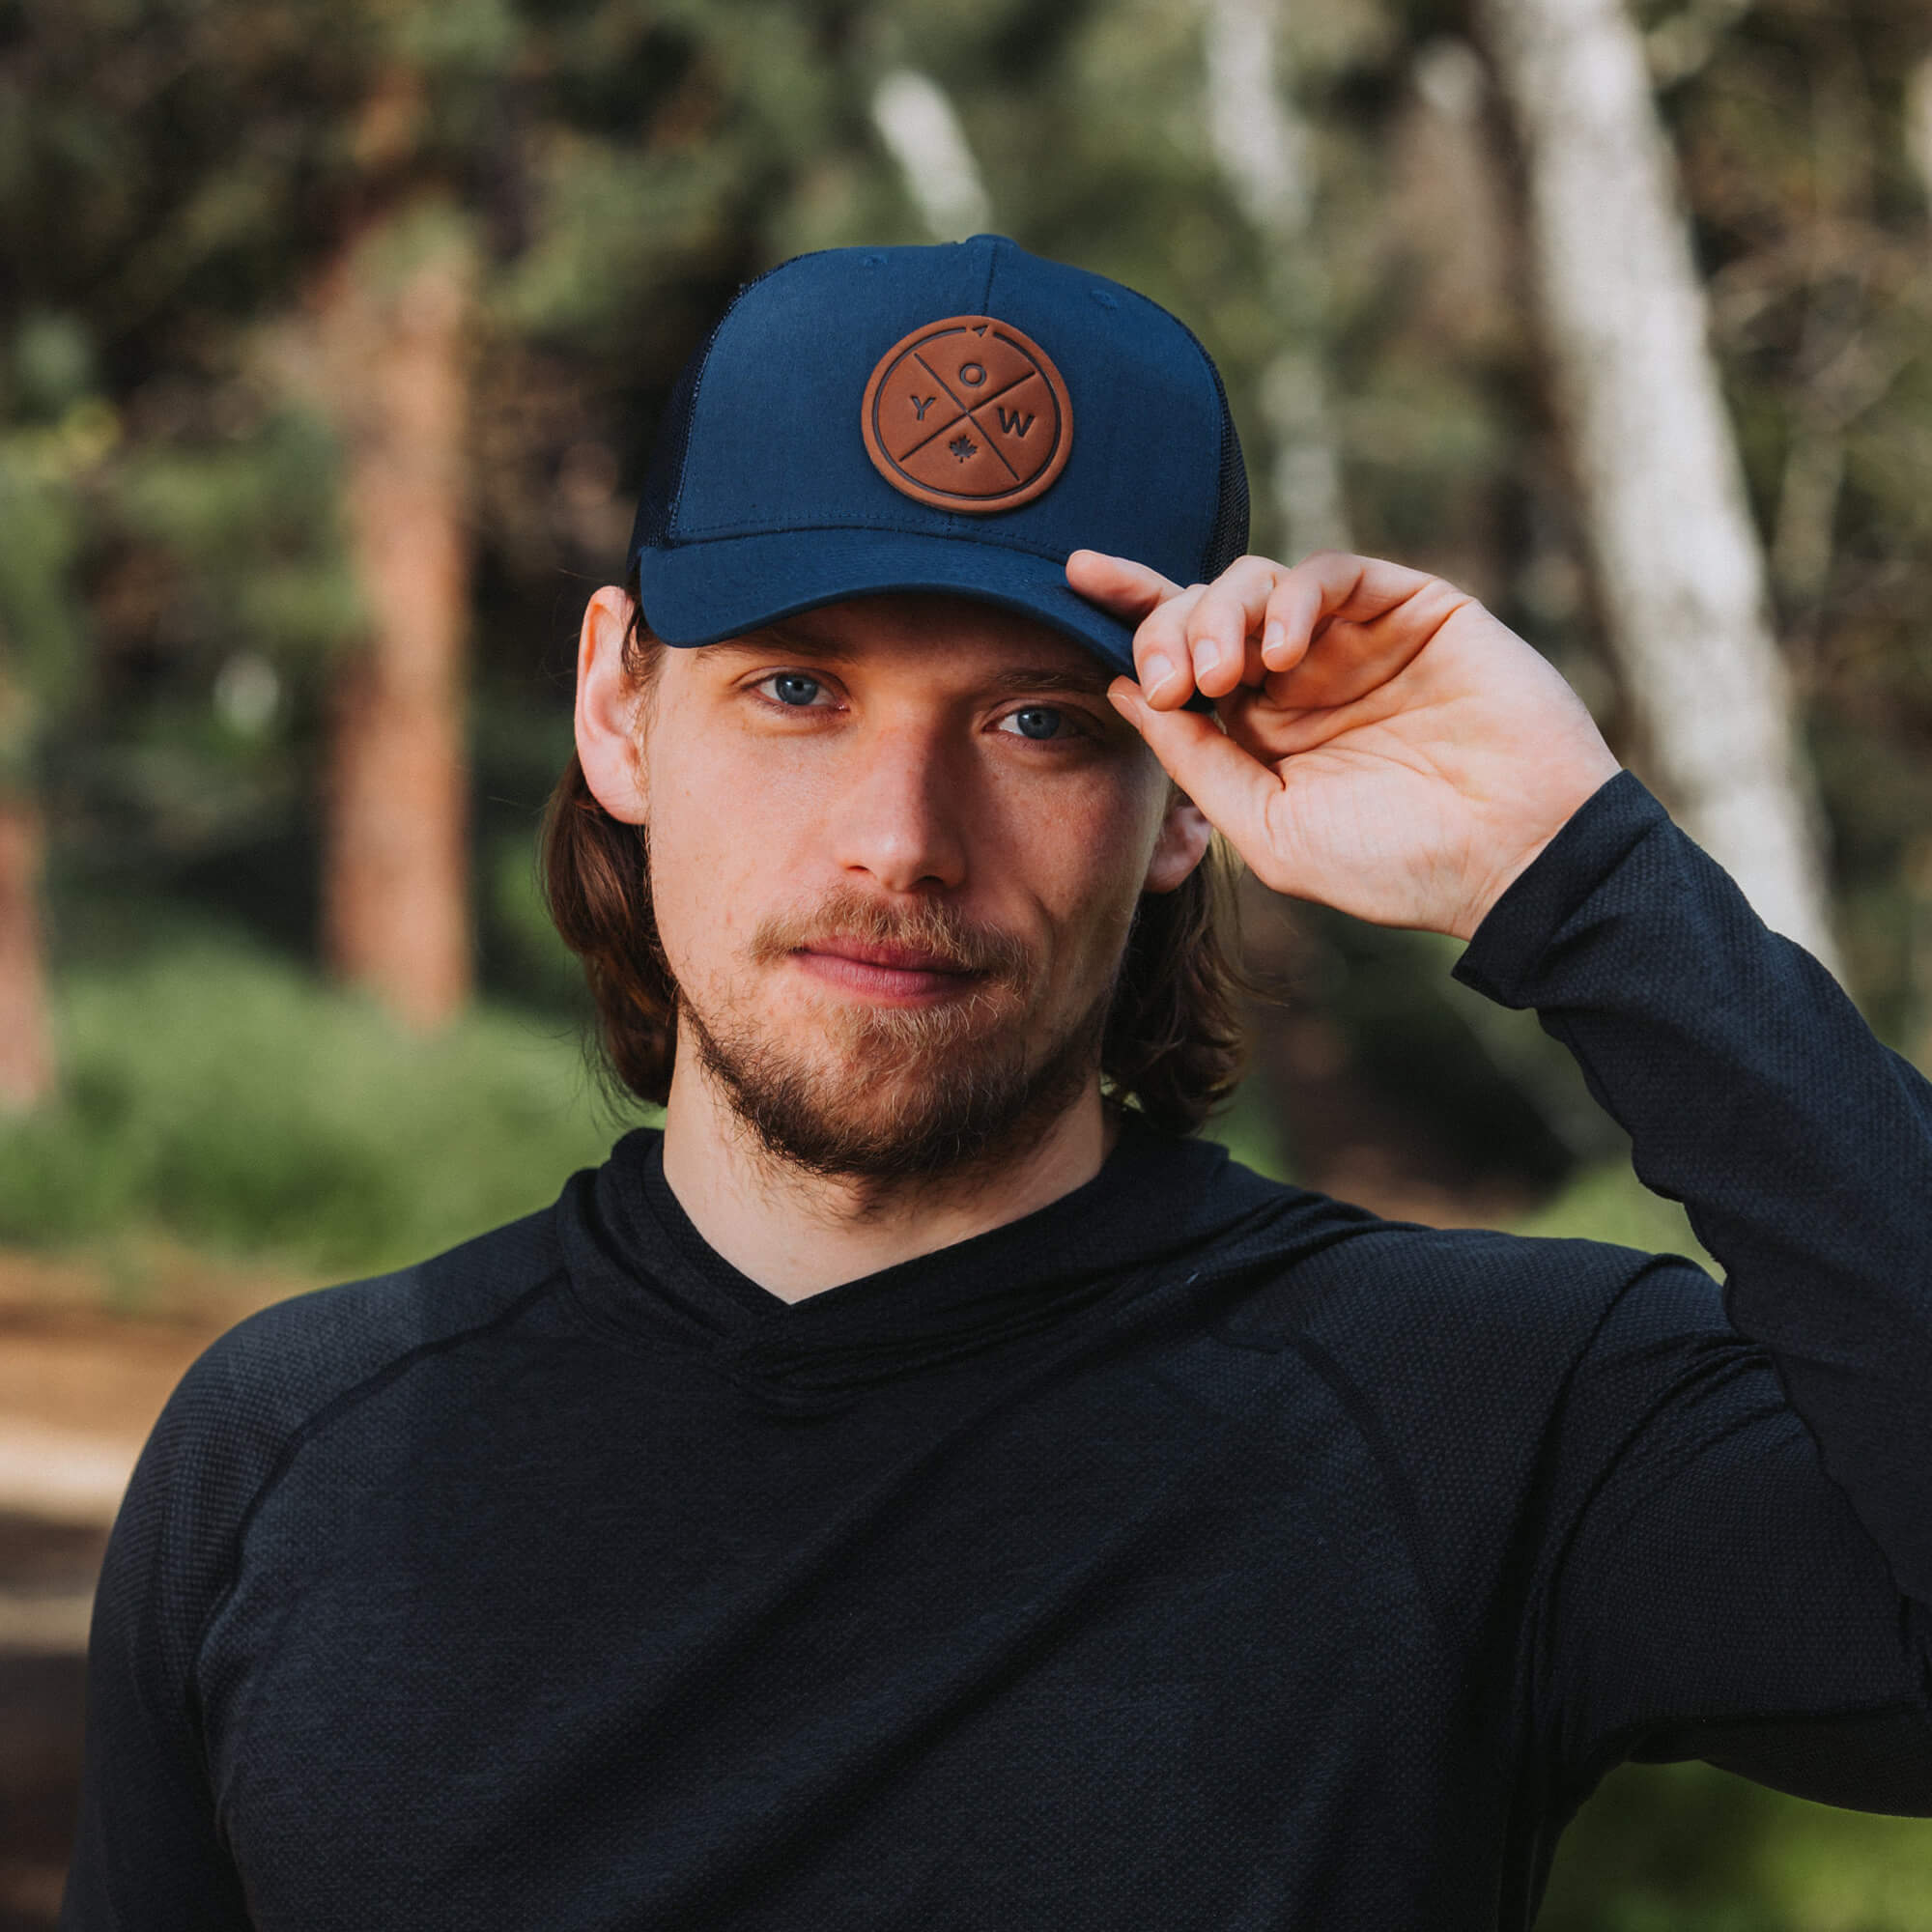 Navy trucker hat with full-grain leather patch with YOW embossing | BLACK-002-008, CHARC-002-008, NAVY-002-008, HGREY-002-008, MOSS-002-008, BROWN-002-008